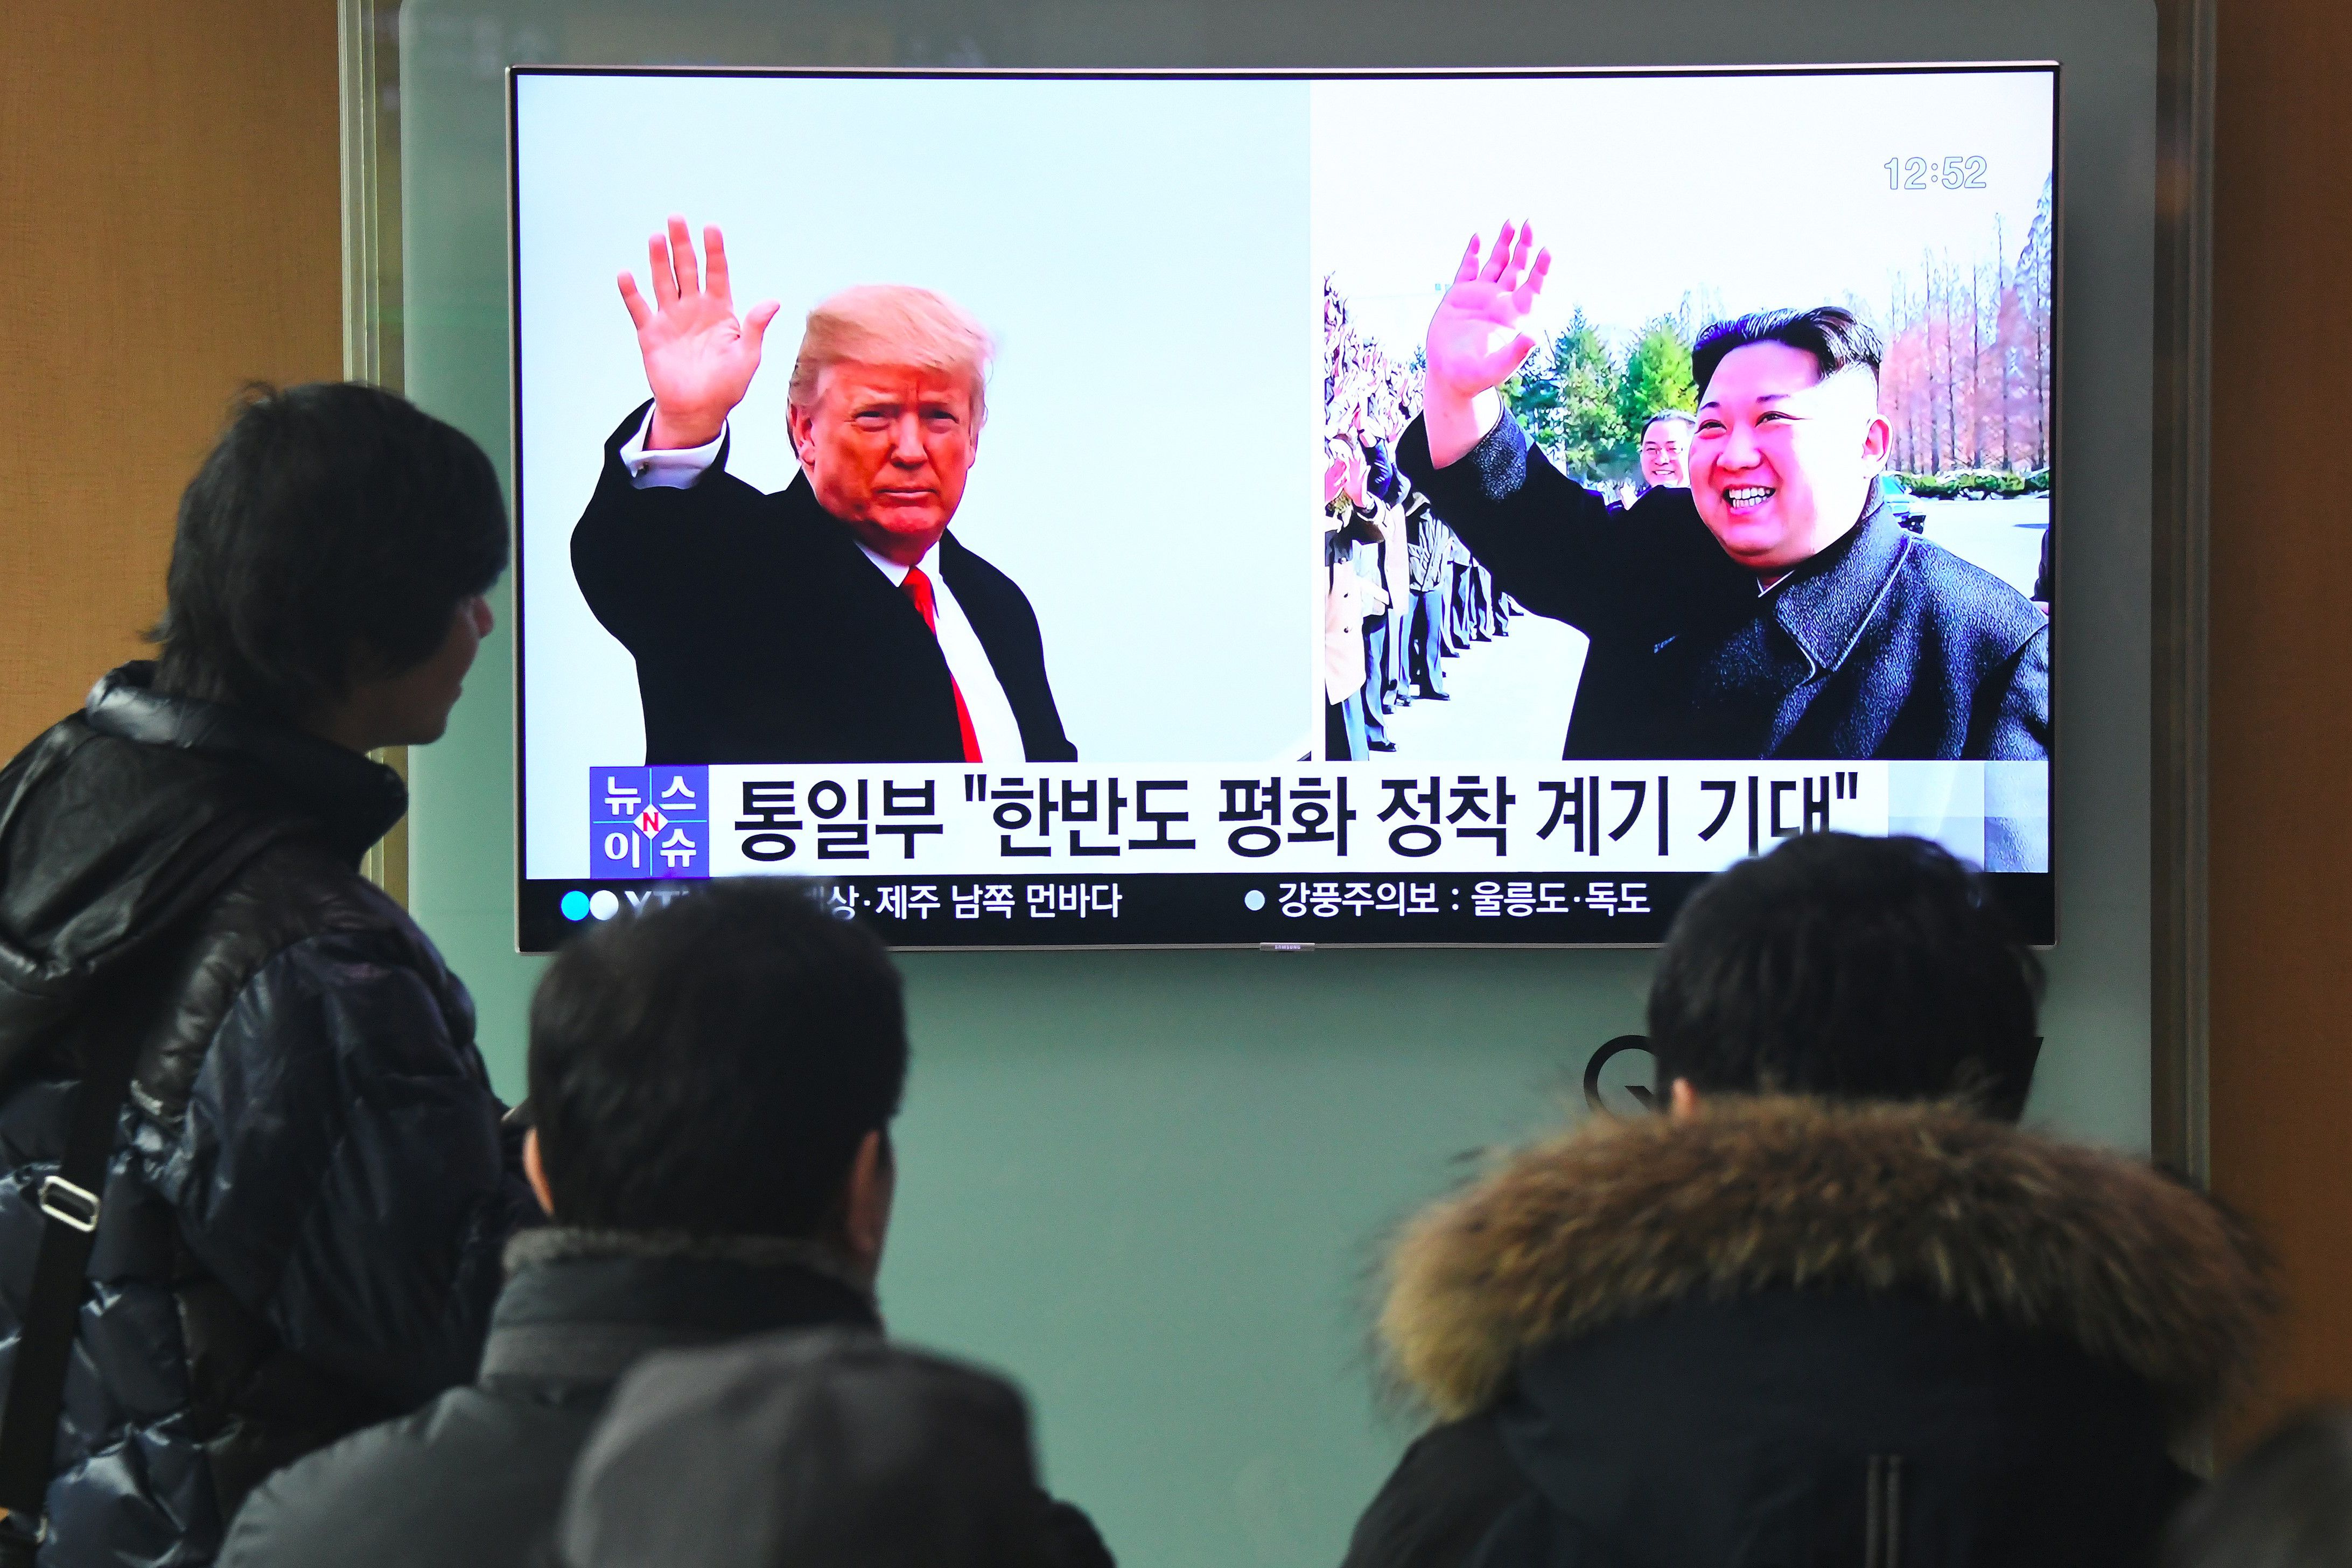 Side by side photos of President Trump and Kim Jong Un on a television